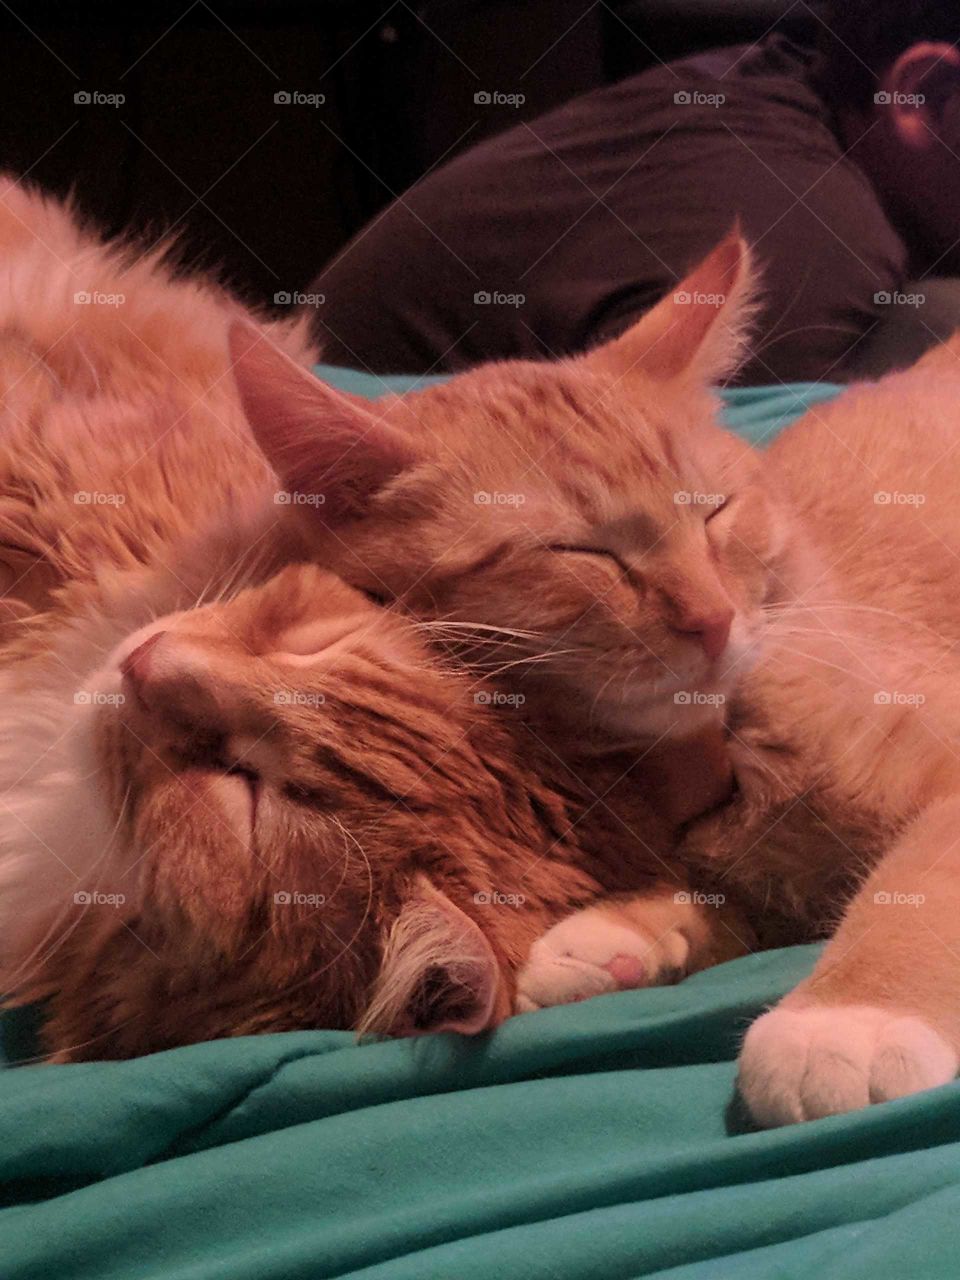 Two sleepy cats cuddling together on a bed